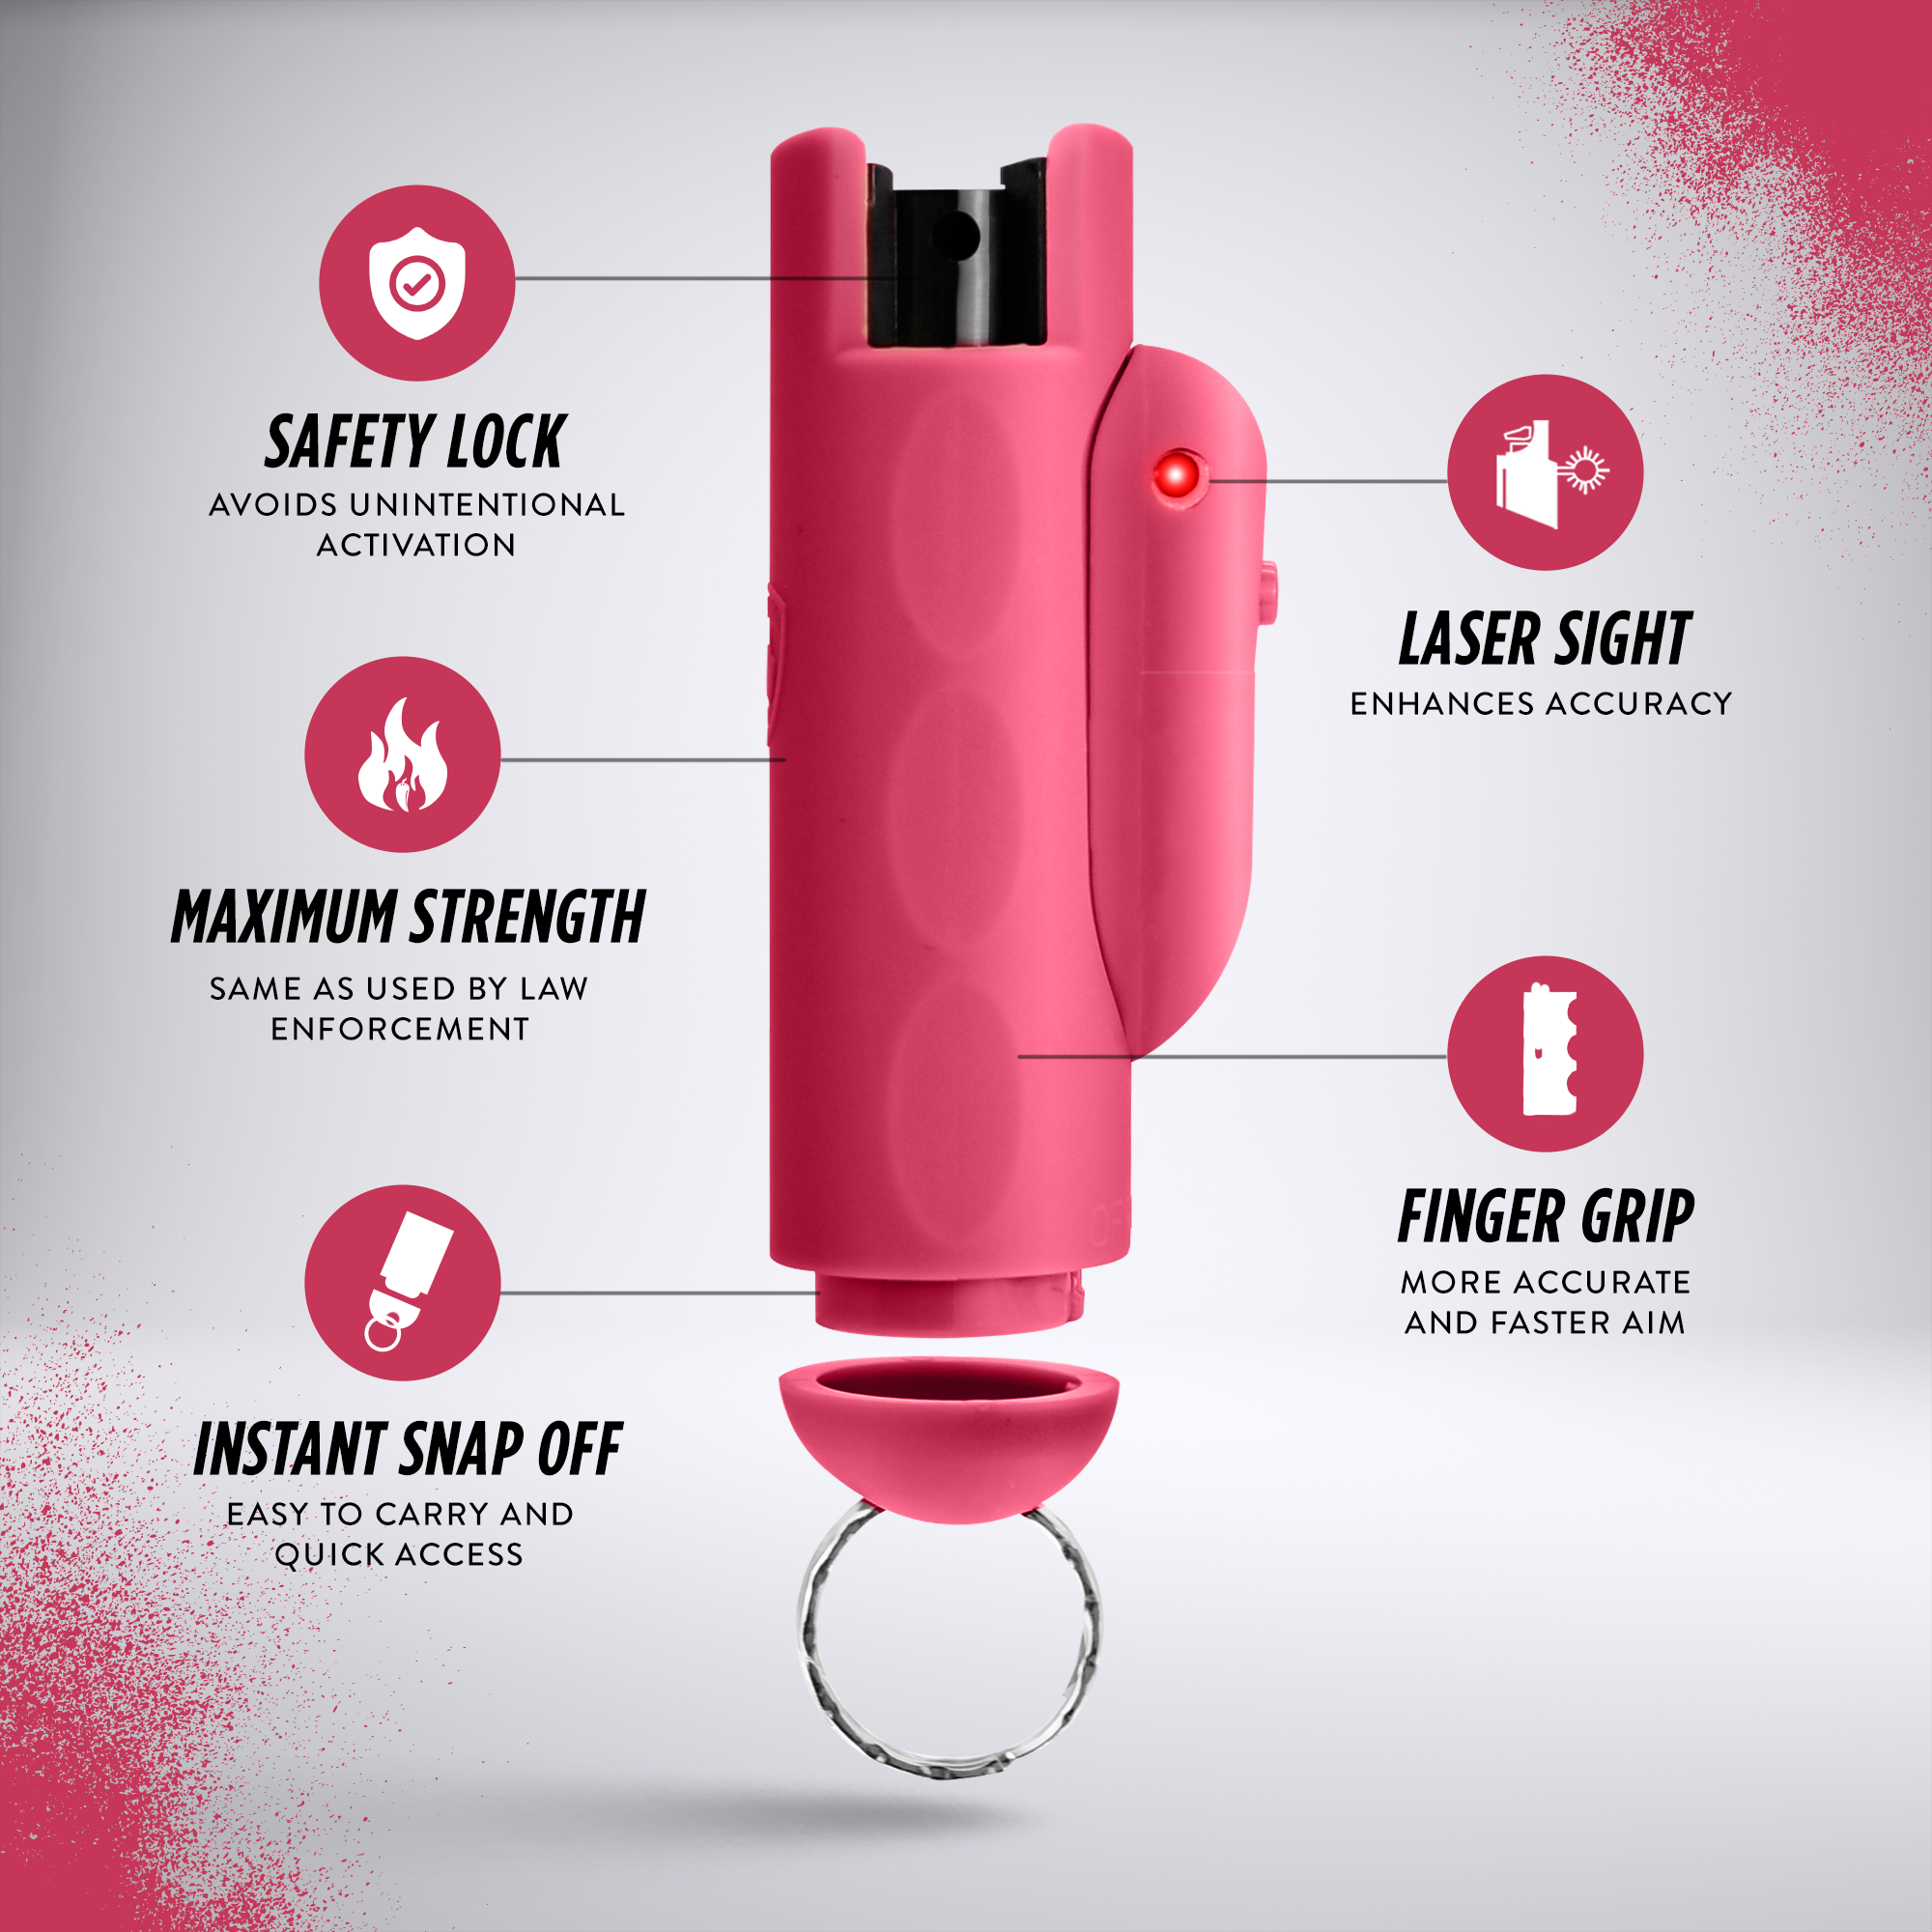 AccuFire 2 Laser Assist Keychain Pepper Spray with Instant Release Pepper Spray, 16' Range, Maximum Strength